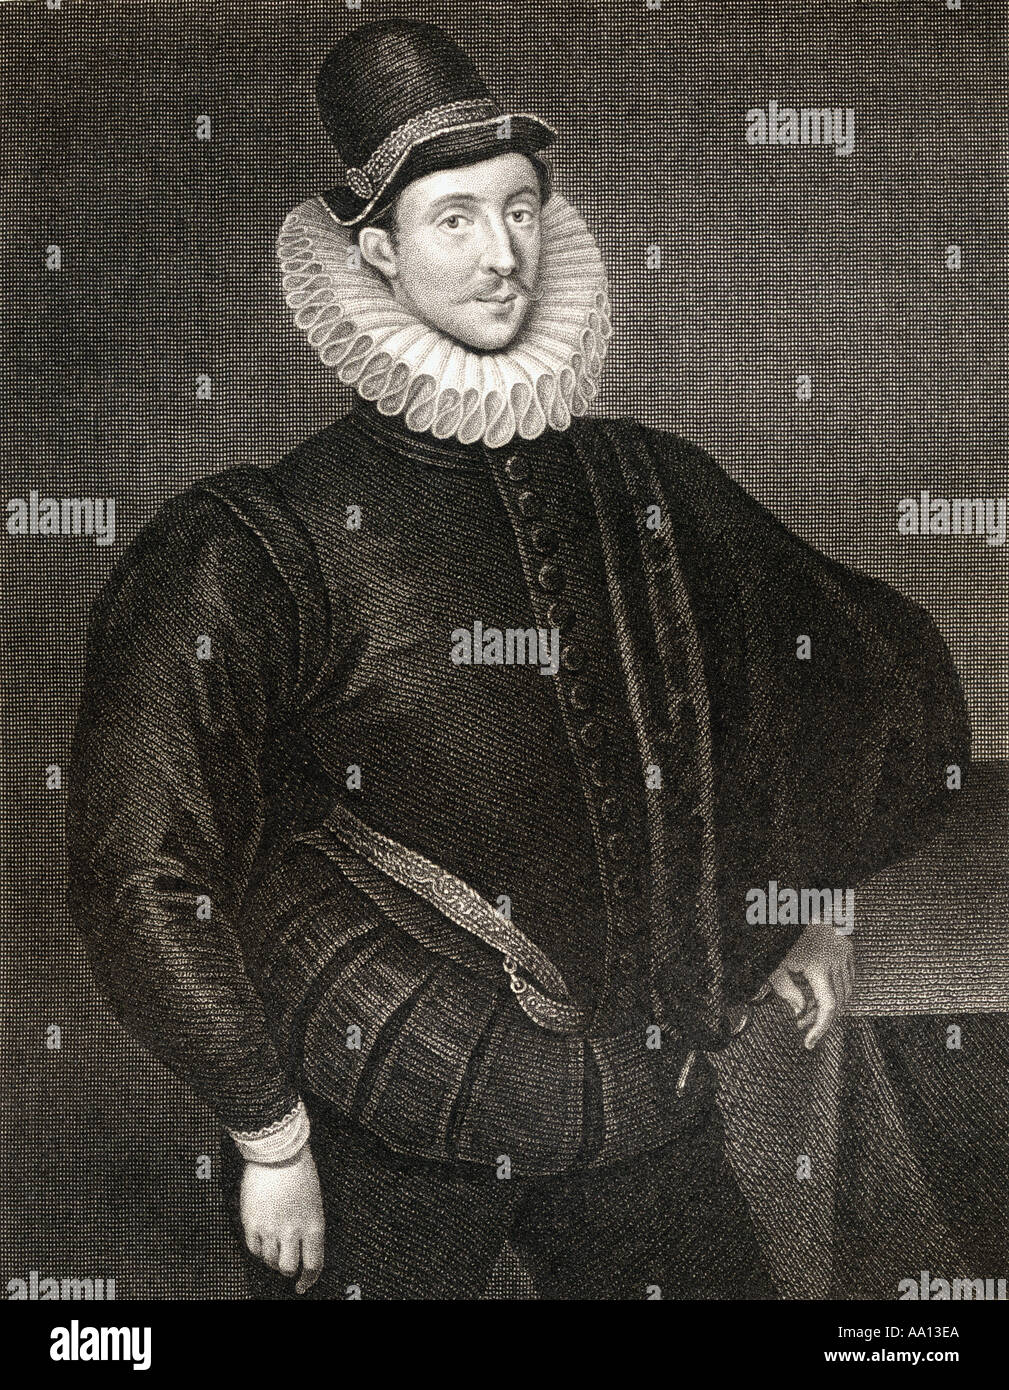 Fulke Greville, 1st Baron Brooke, 1554 to 1628.  English philosophical poet and exponent of a plain style of writing. Stock Photo